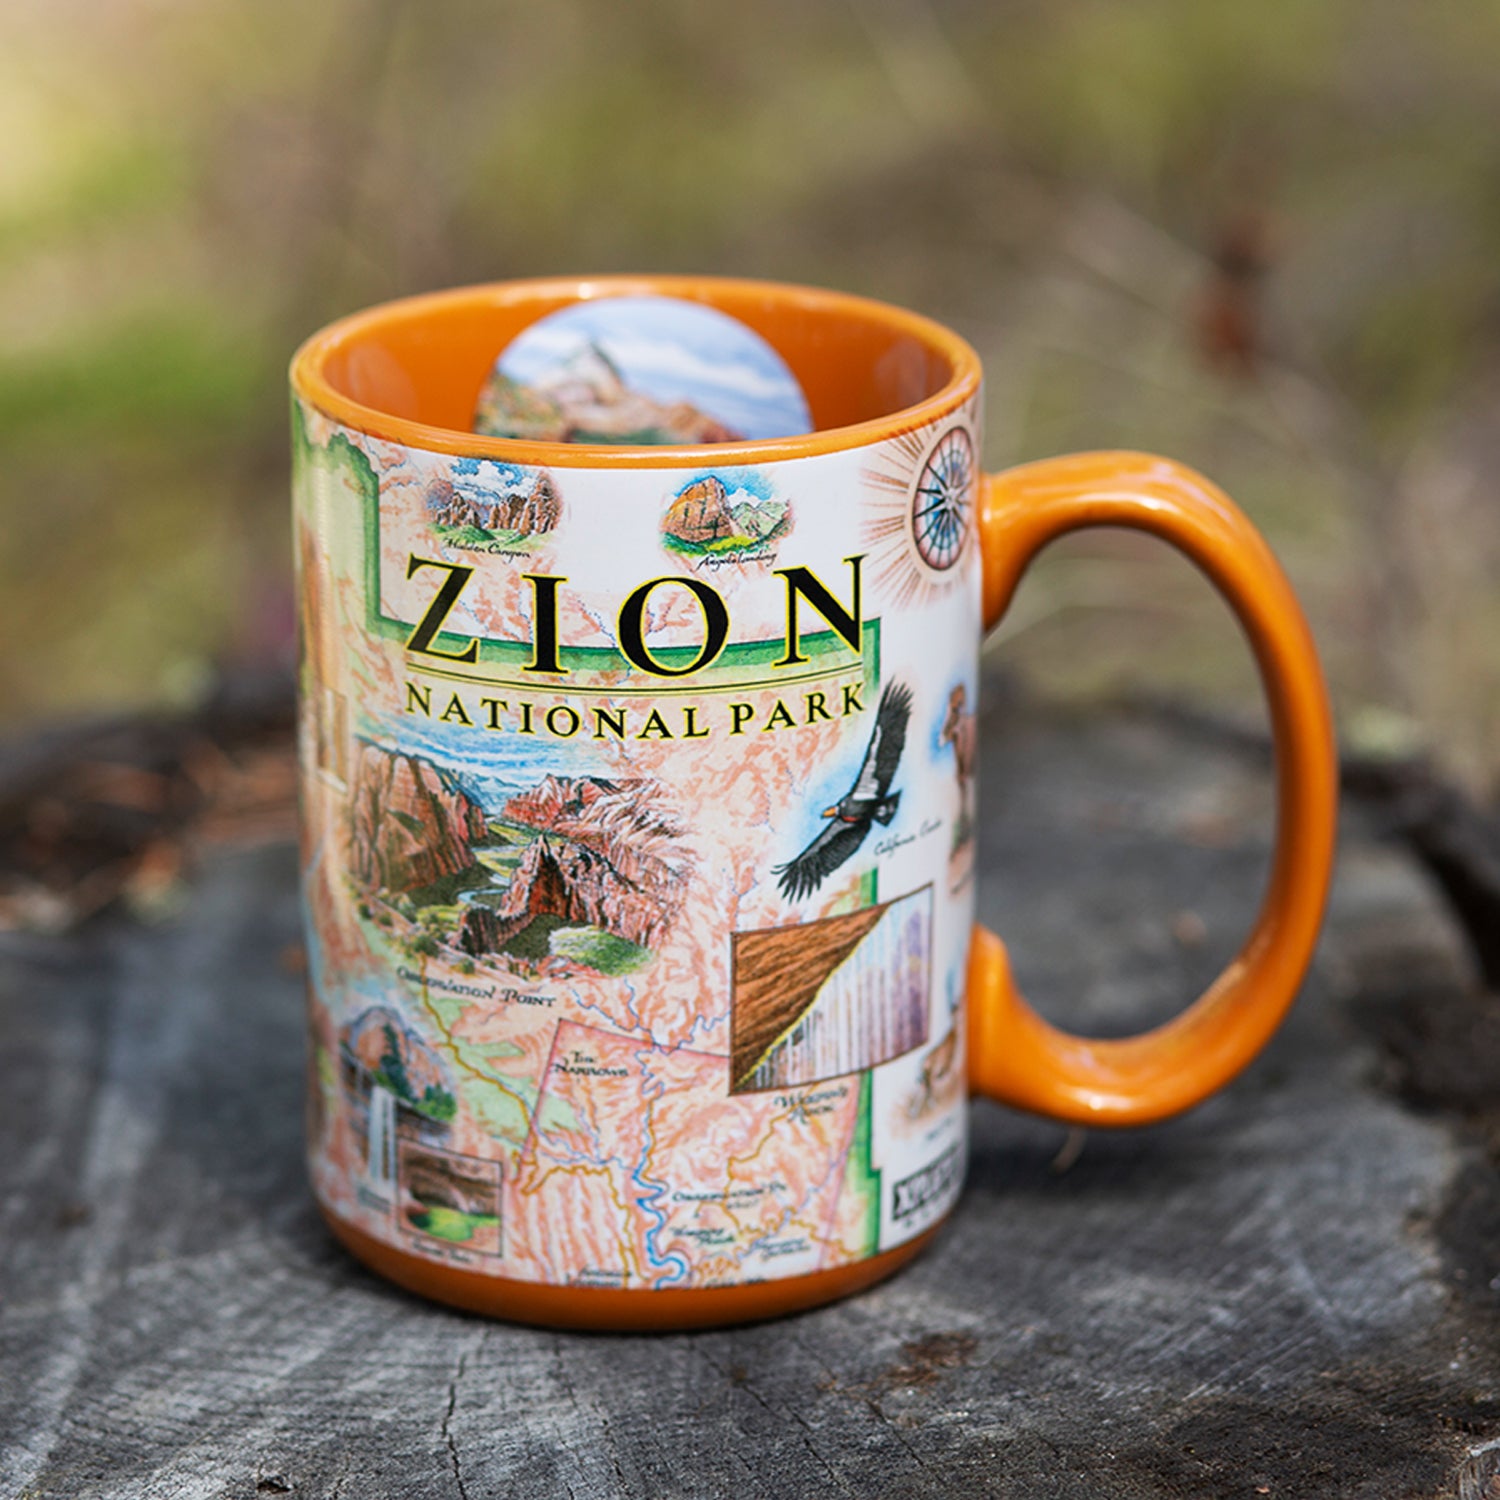 Orange 16 oz Zion National Park ceramic coffee mug with handle sitting on a log in a forest.  